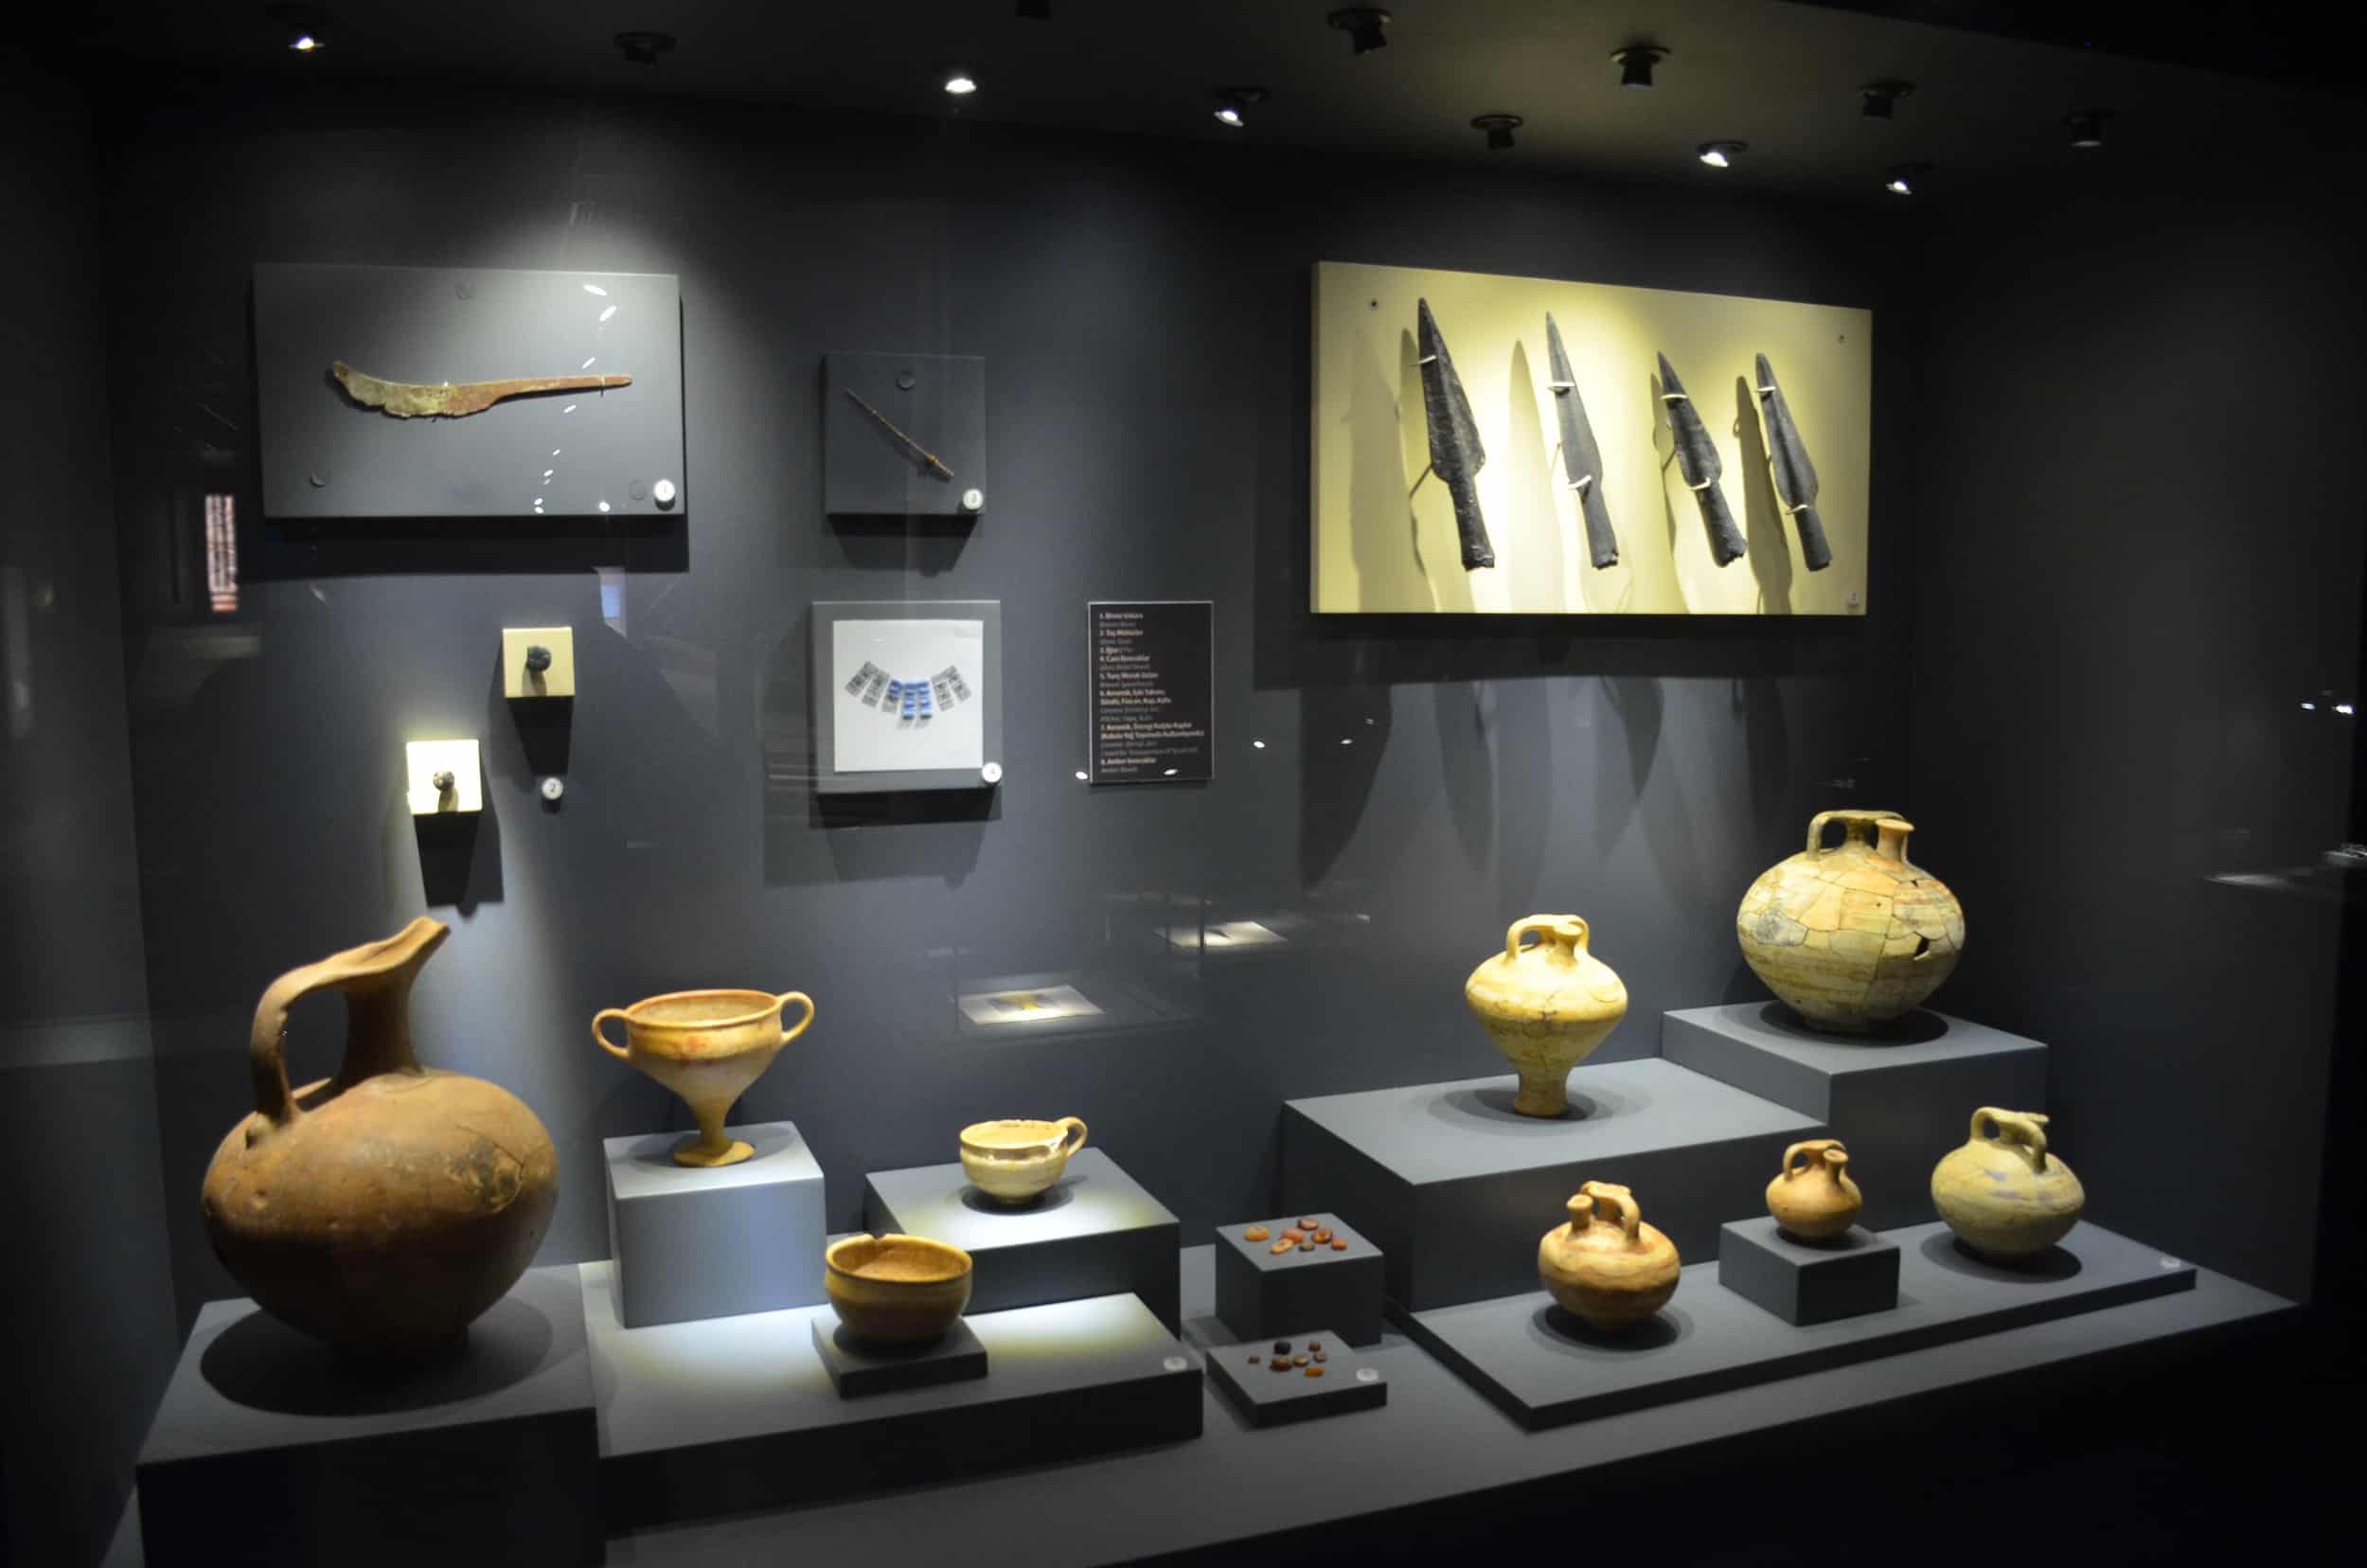 Artifacts in the Late Bronze Age Shipwrecks Exhibition